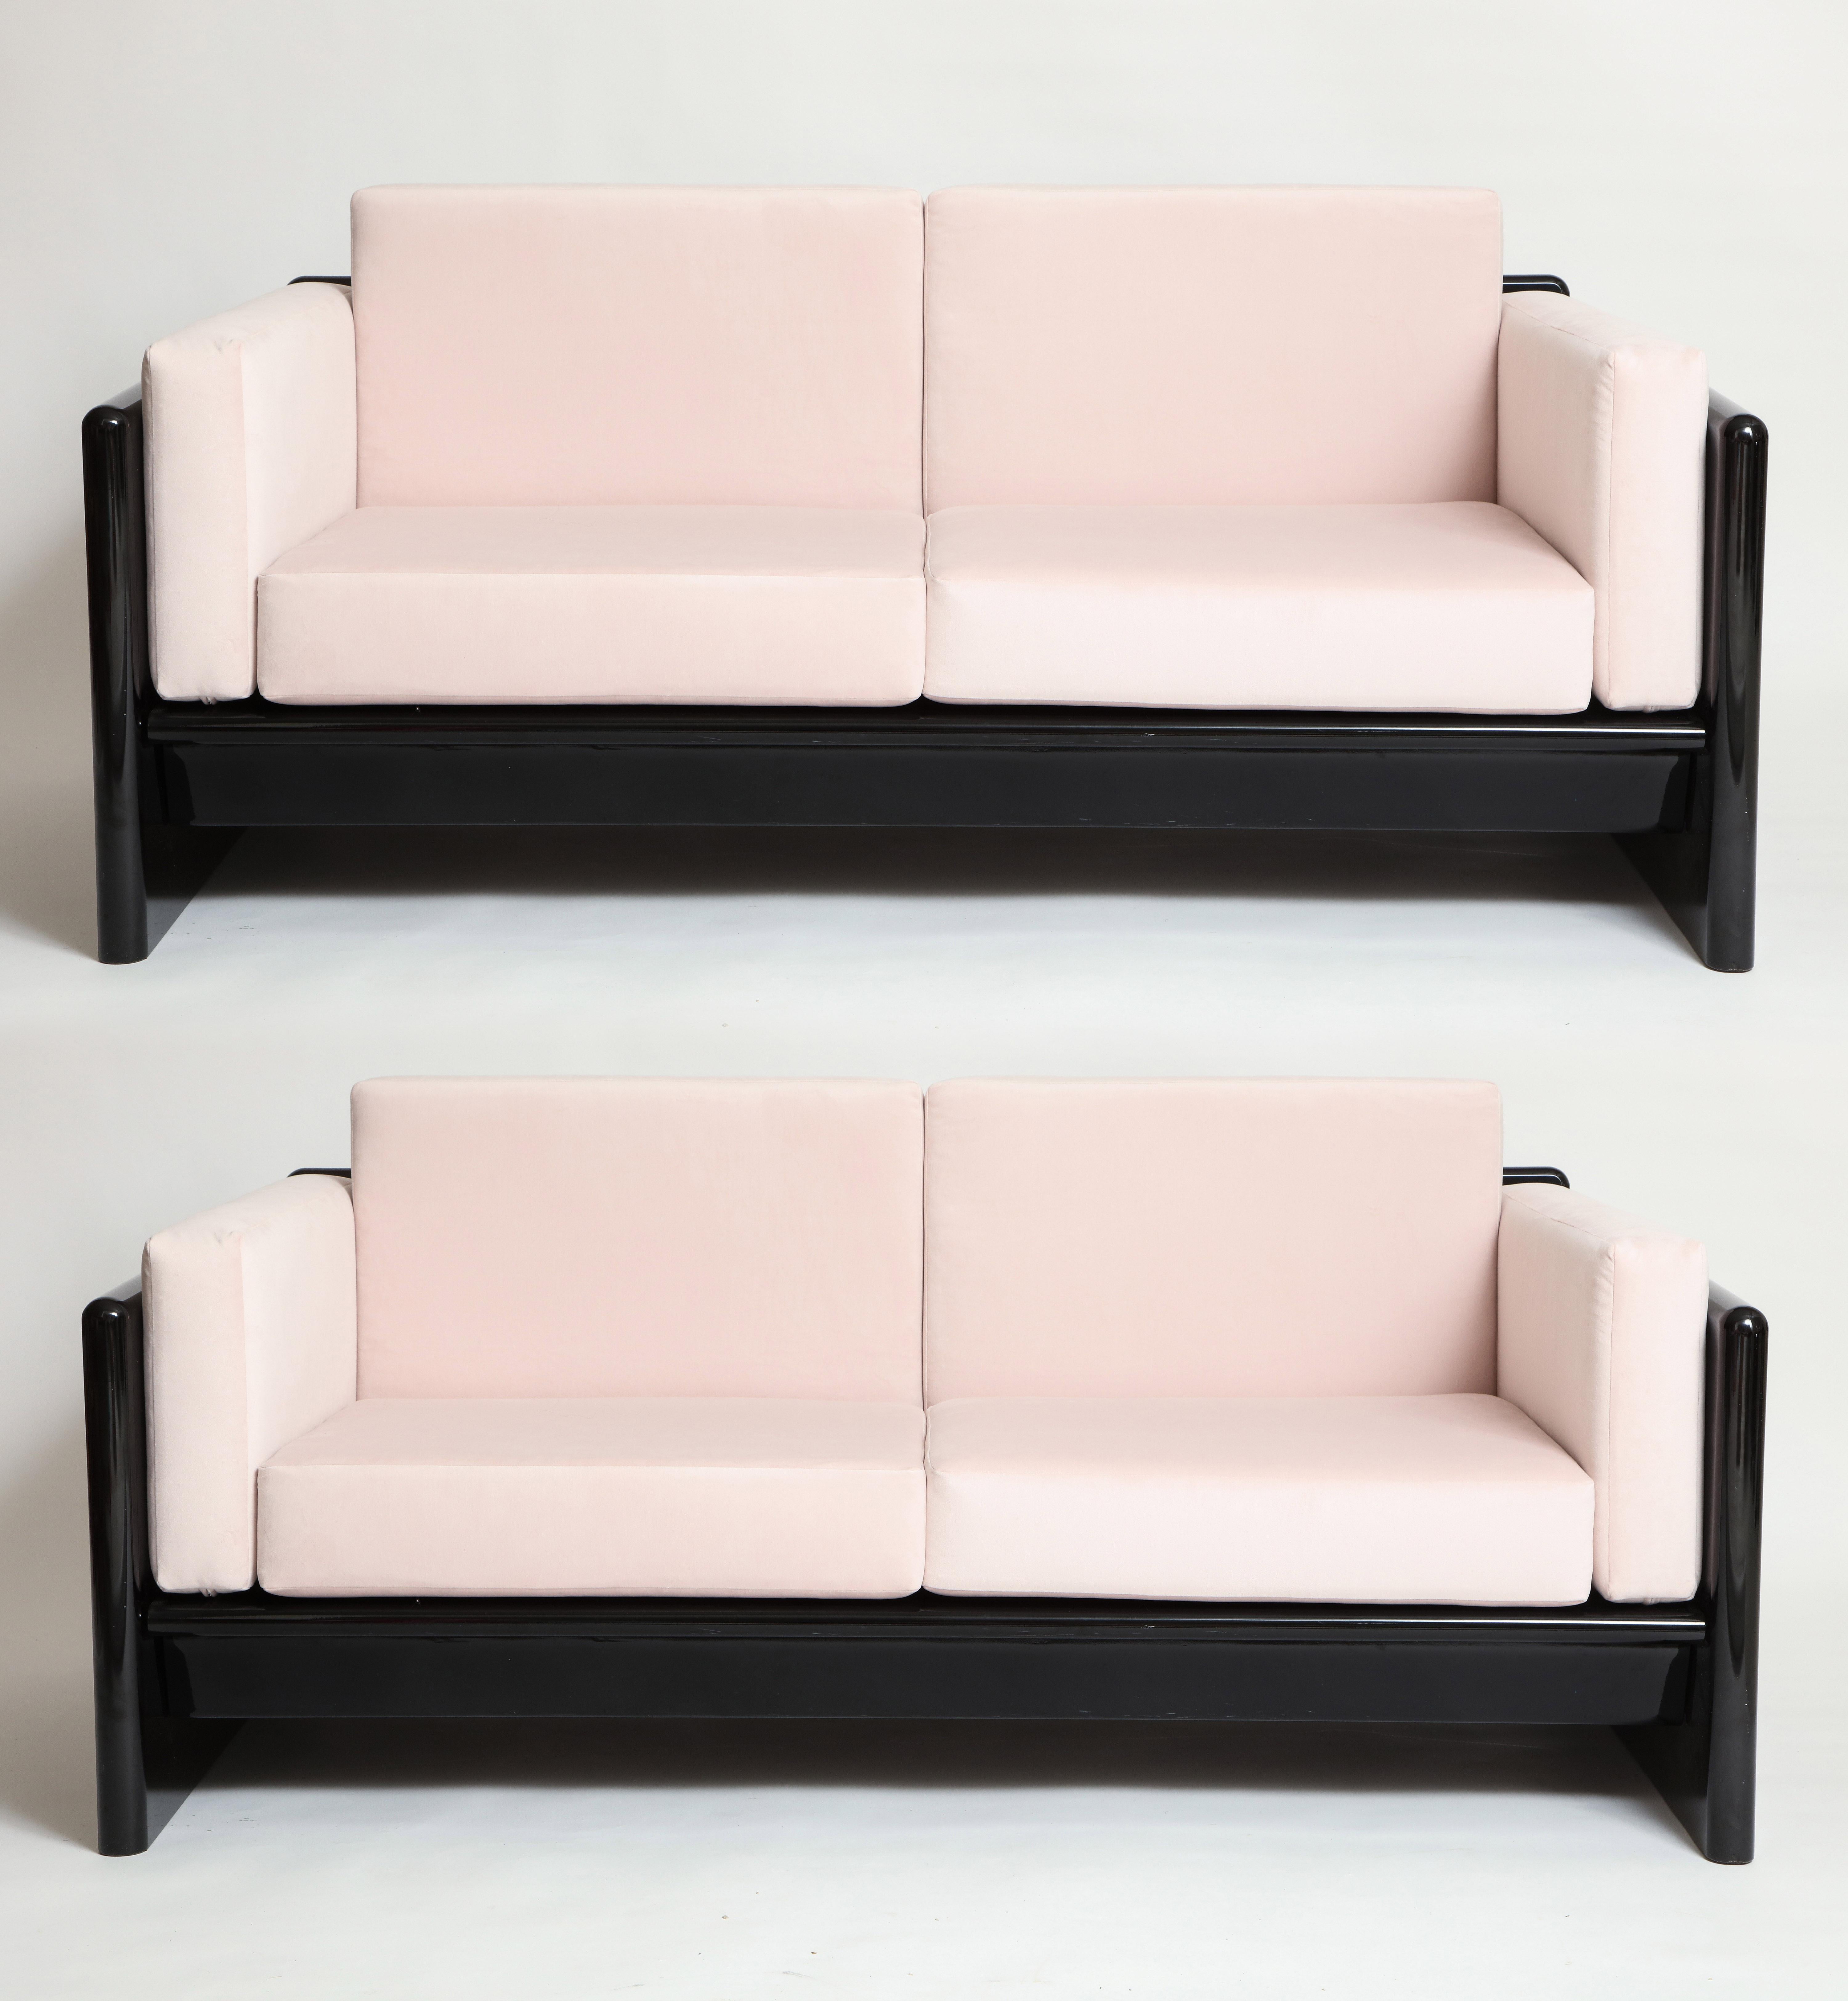 Simon Gavina black lacquer sofa sette pink velvet, Italy, 1970s

Gorgeous chic black and pink sofa/settee newly upholstered in light pink fabric.
The black is solid wood covered with black lacquer. This is a solid heavy piece.
Price is per